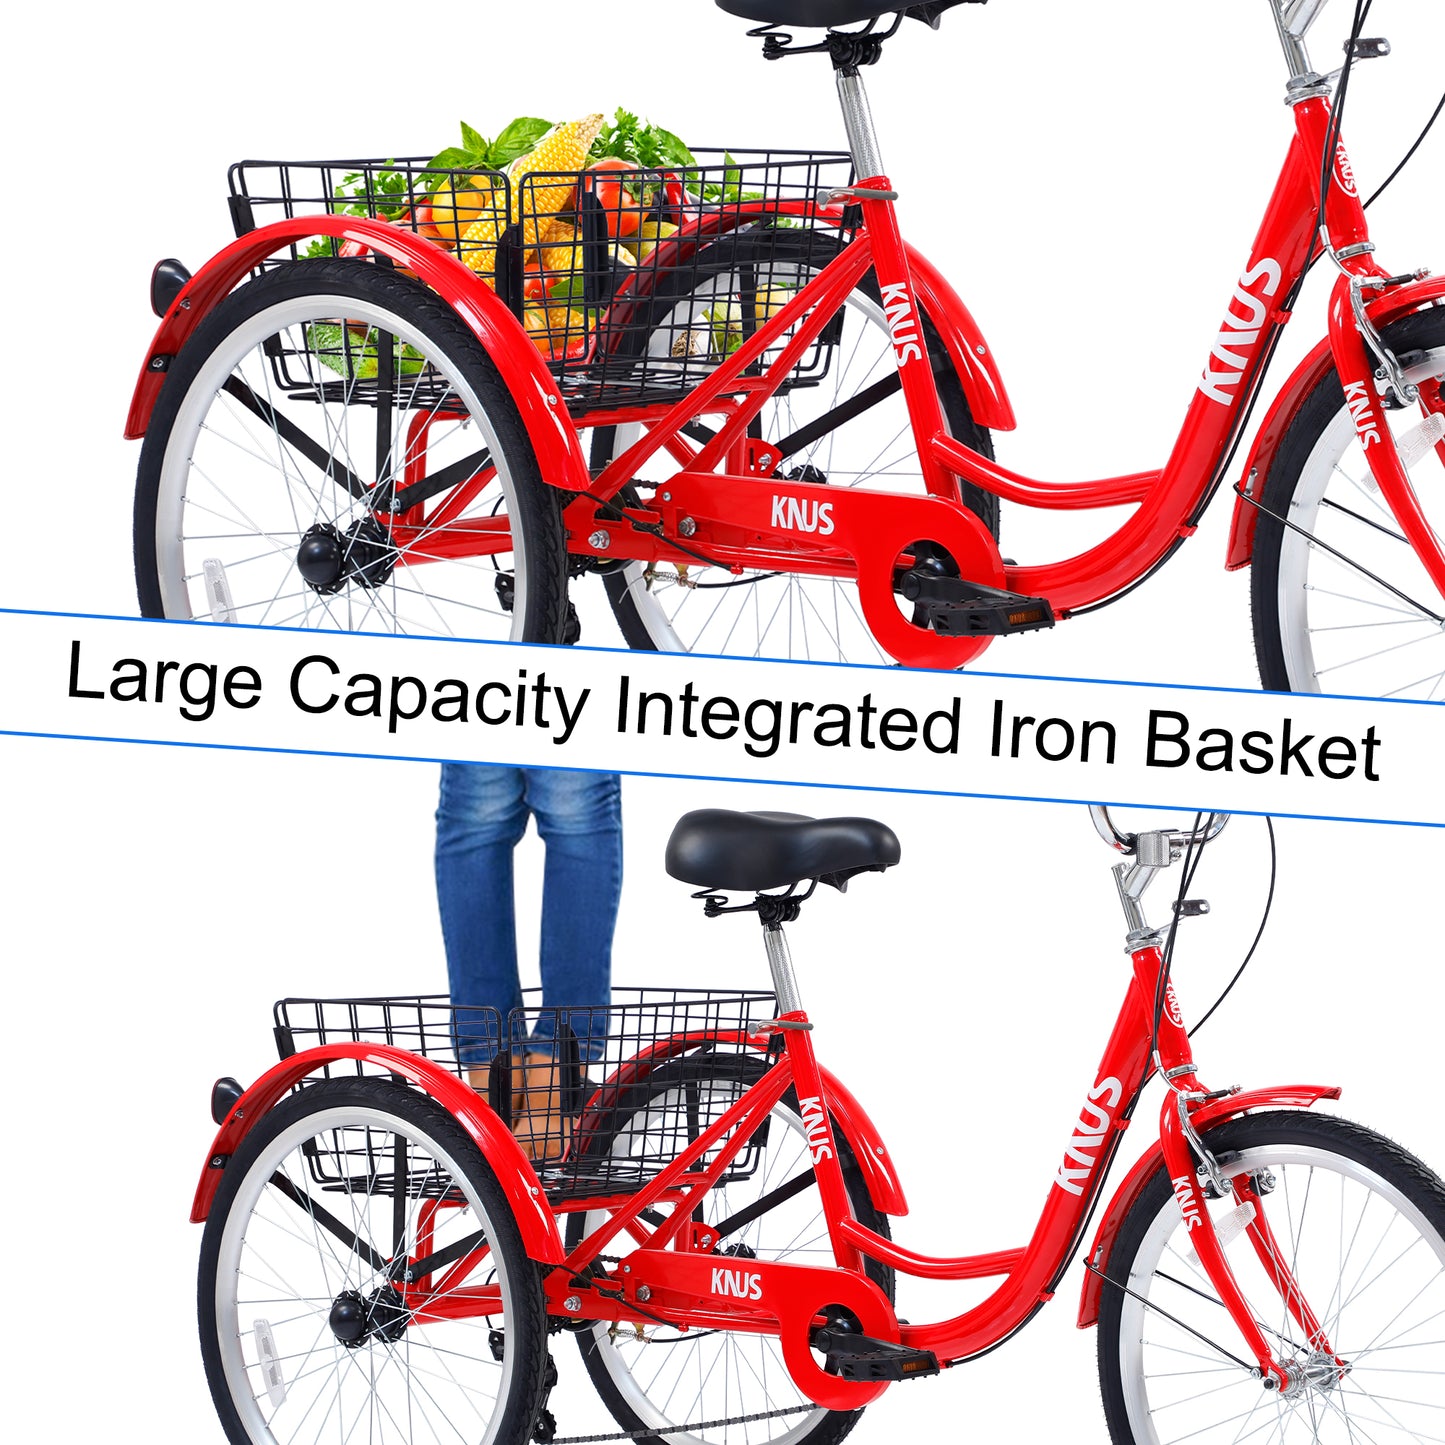 Adult Tricycle Trikes,3-Wheel Bikes,24 Inch Wheels 7 Speed Cruiser Bicycles with Large Shopping Basket for Women and Men